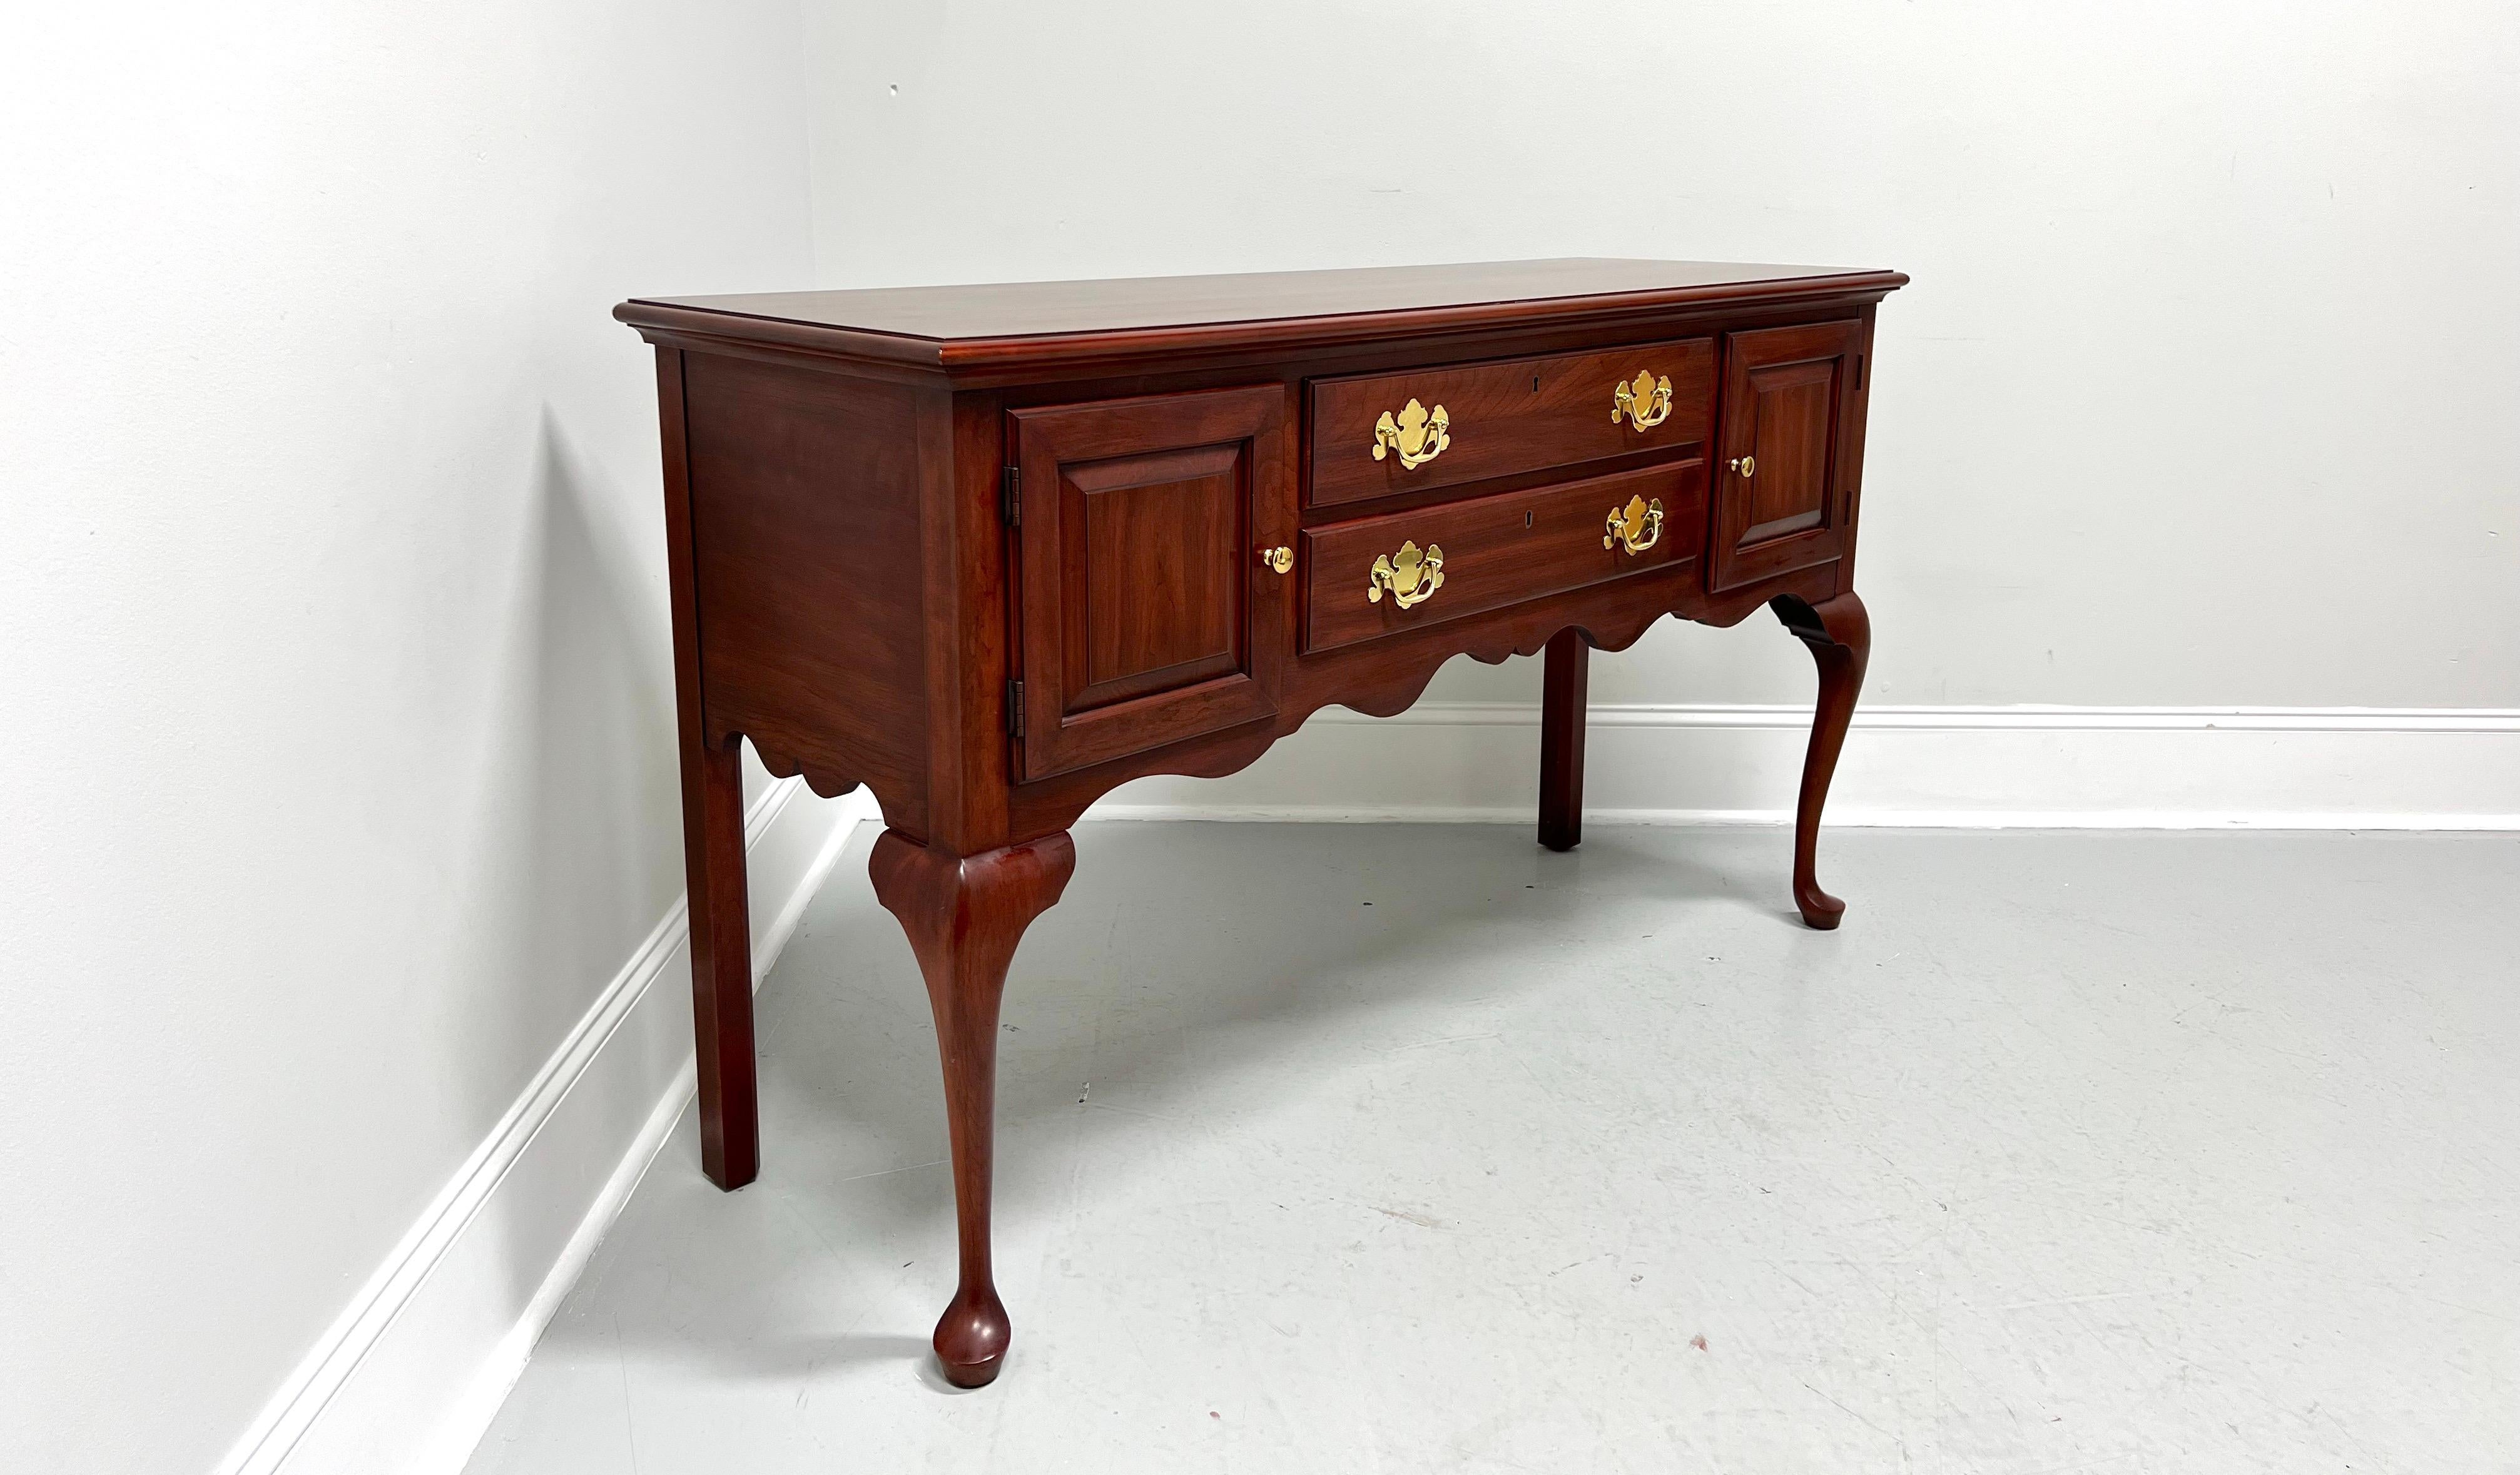 A Queen Anne style sideboard by Henkel Harris, of Winchester, Virginia, USA. Solid wild black cherry wood with brass hardware, bevel edge to the top, raised panel door fronts, carved apron, cabriole front legs with pad feet, and straight back legs.